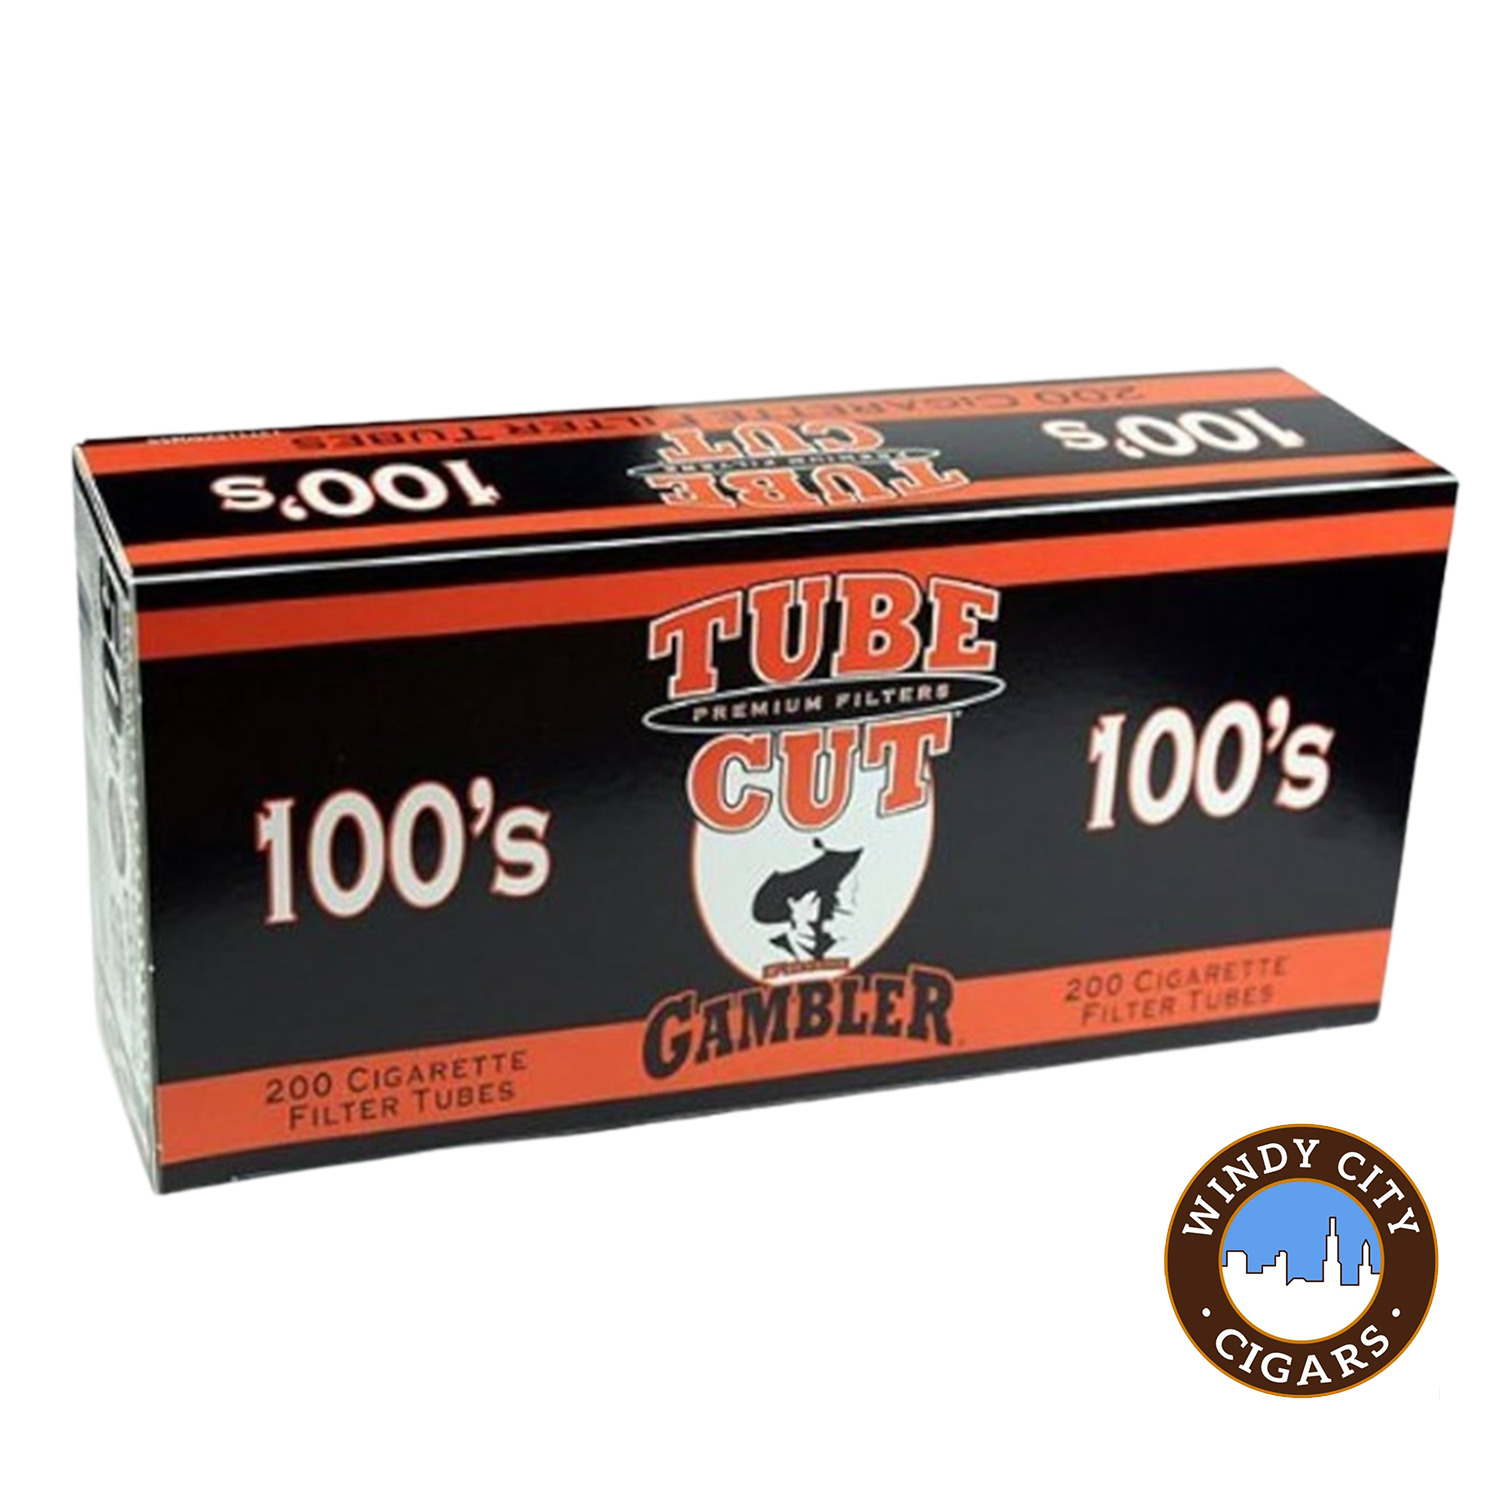 Tube Cut Red 100s Cigarette 200ct Tubes - 10 Boxes